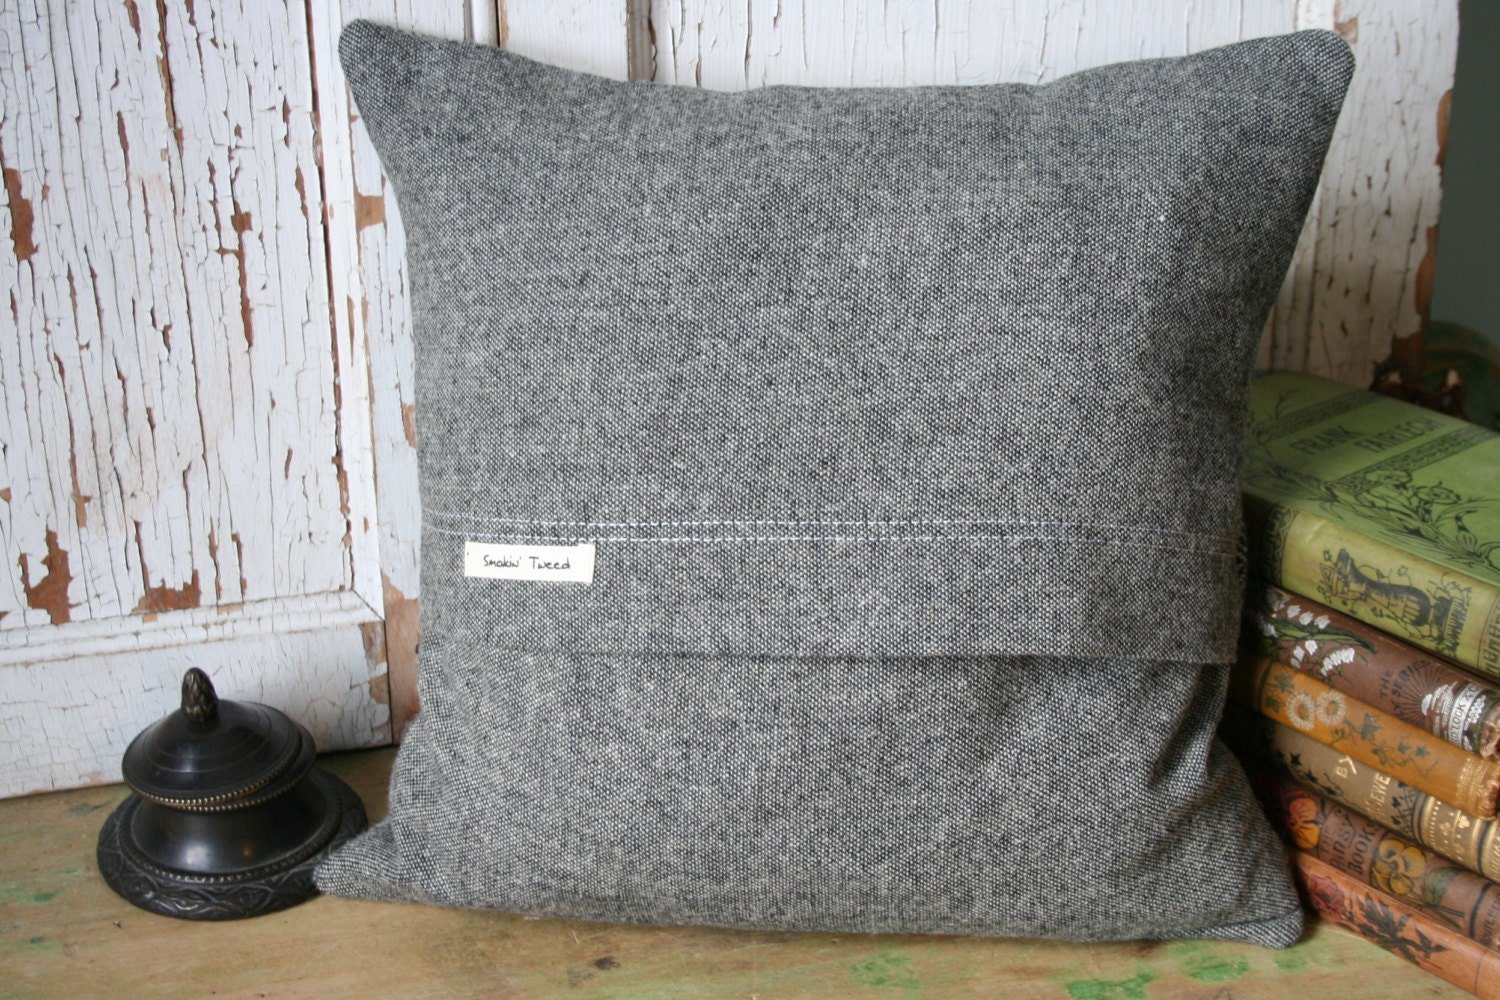 Equestrian Horse PILLOW COVER, Recycled Wool, Gray Tweed, Vintage Lace